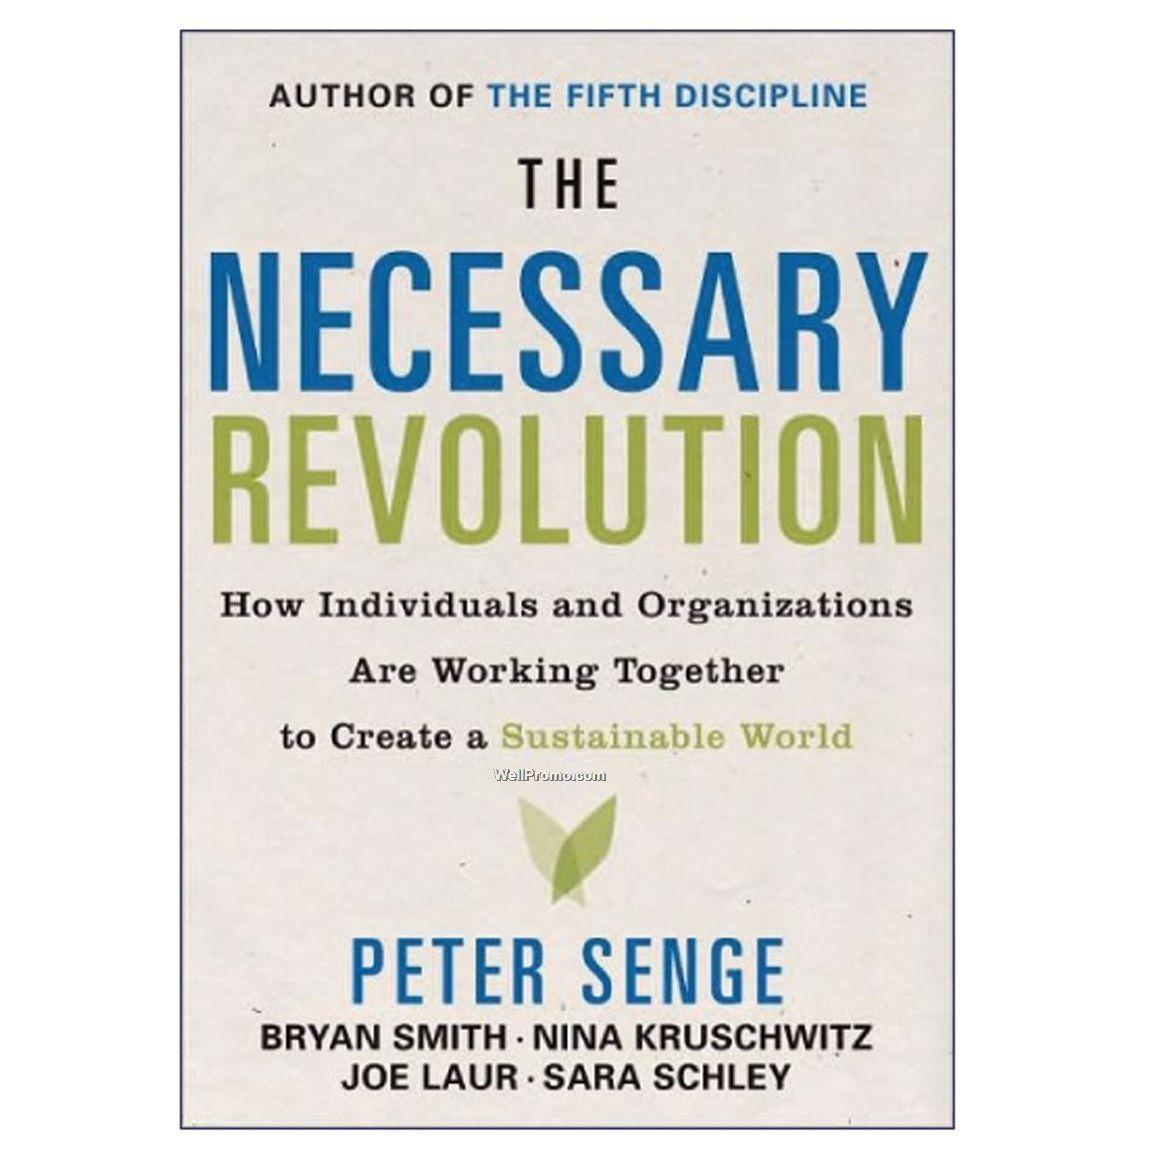 The Necessary Revolution by Peter Senge